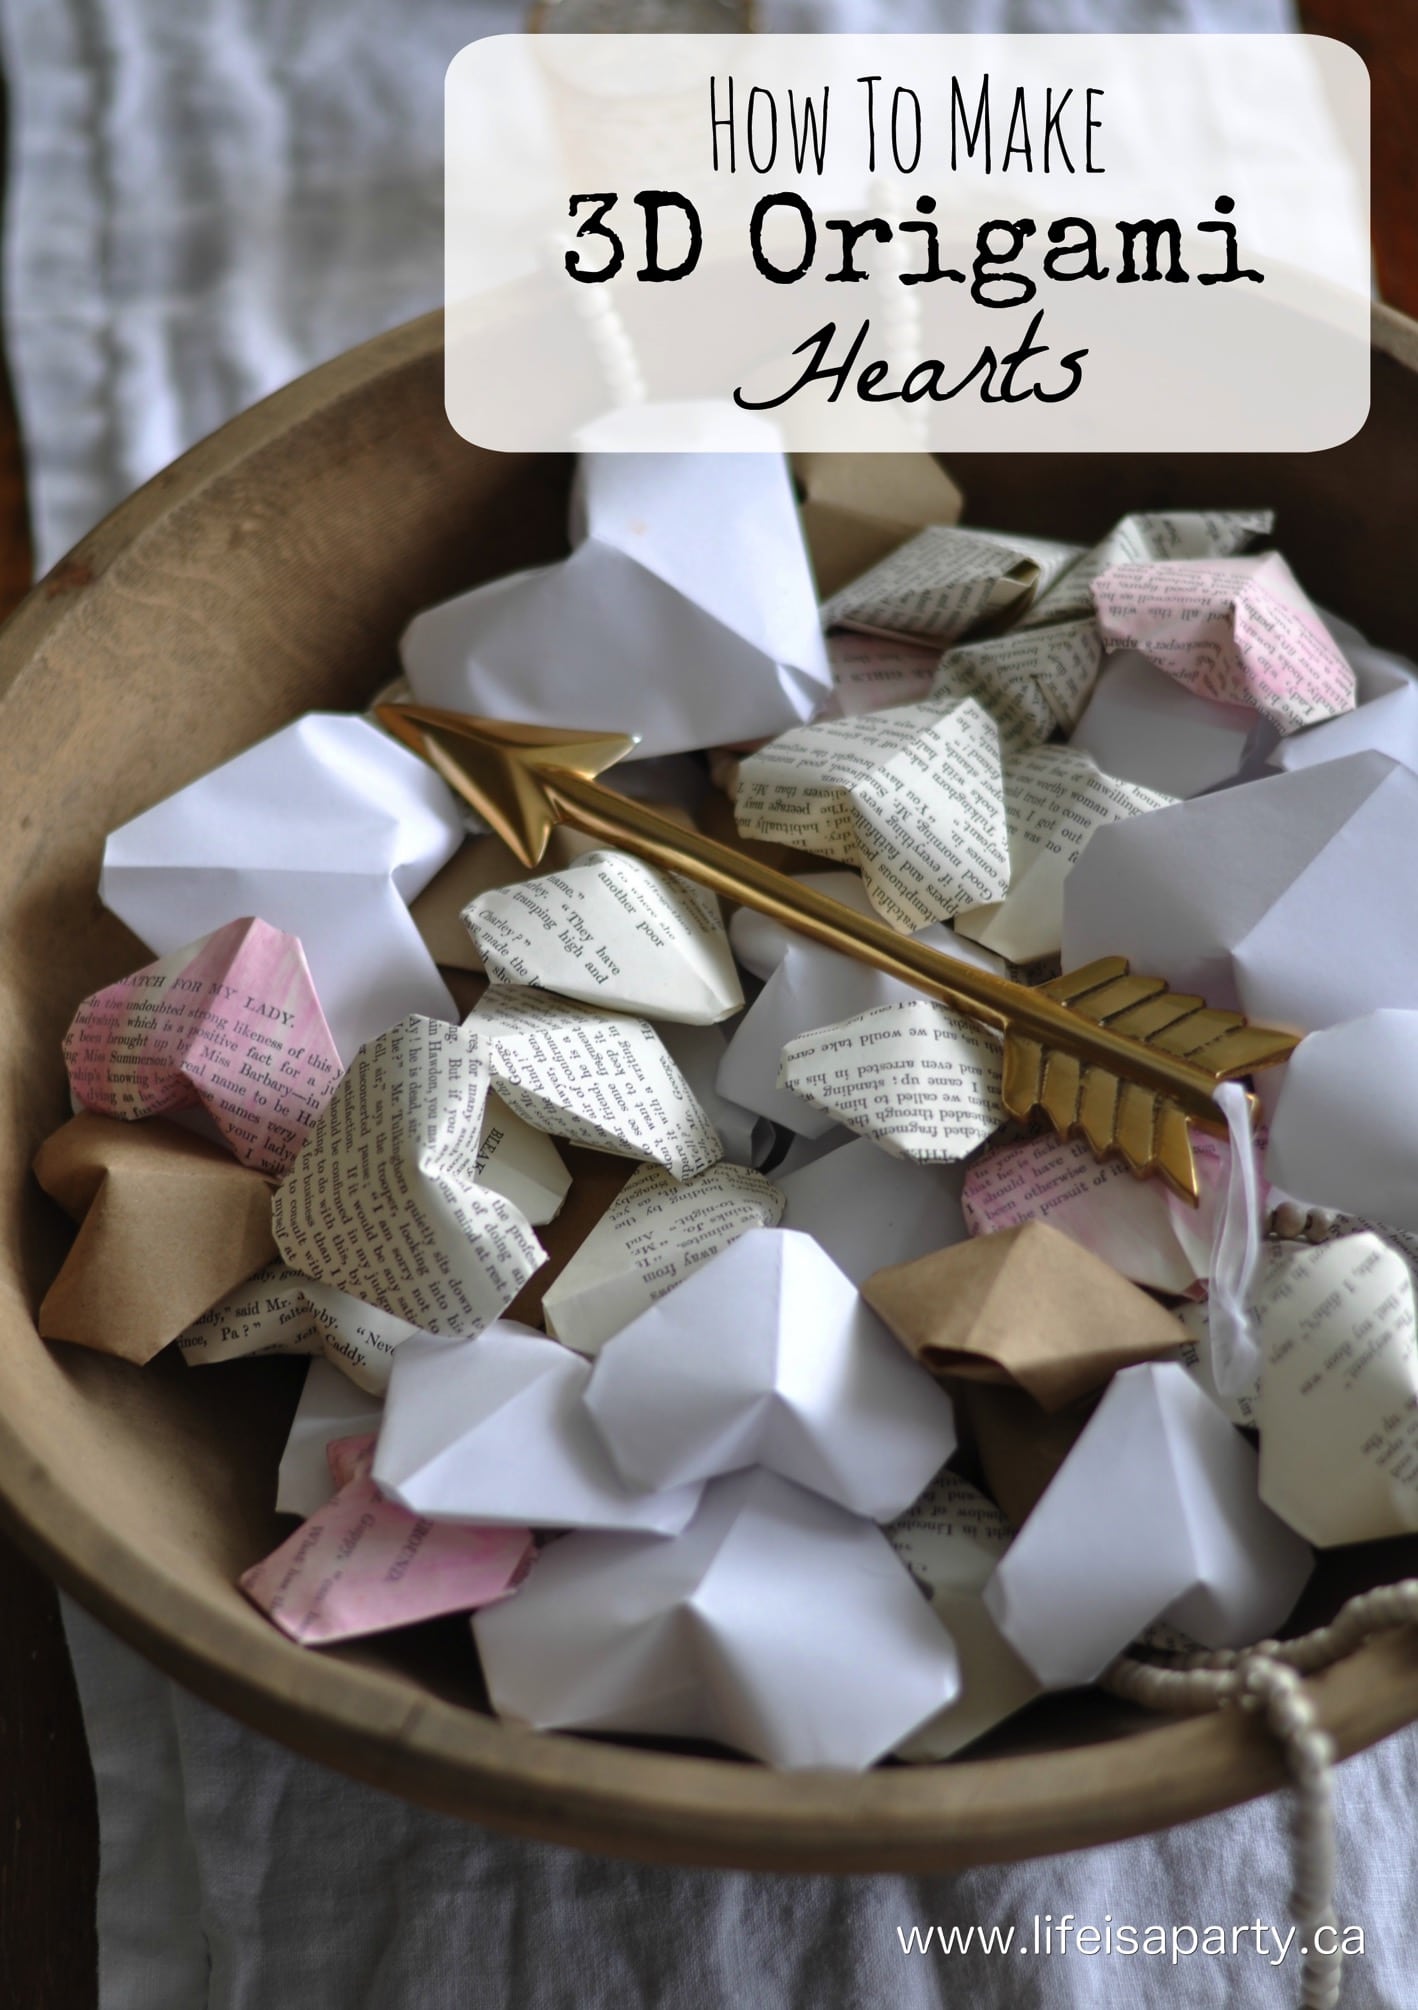 A wooden bowl full of paper 3d origami hearts made out of white, brown and book page paper.